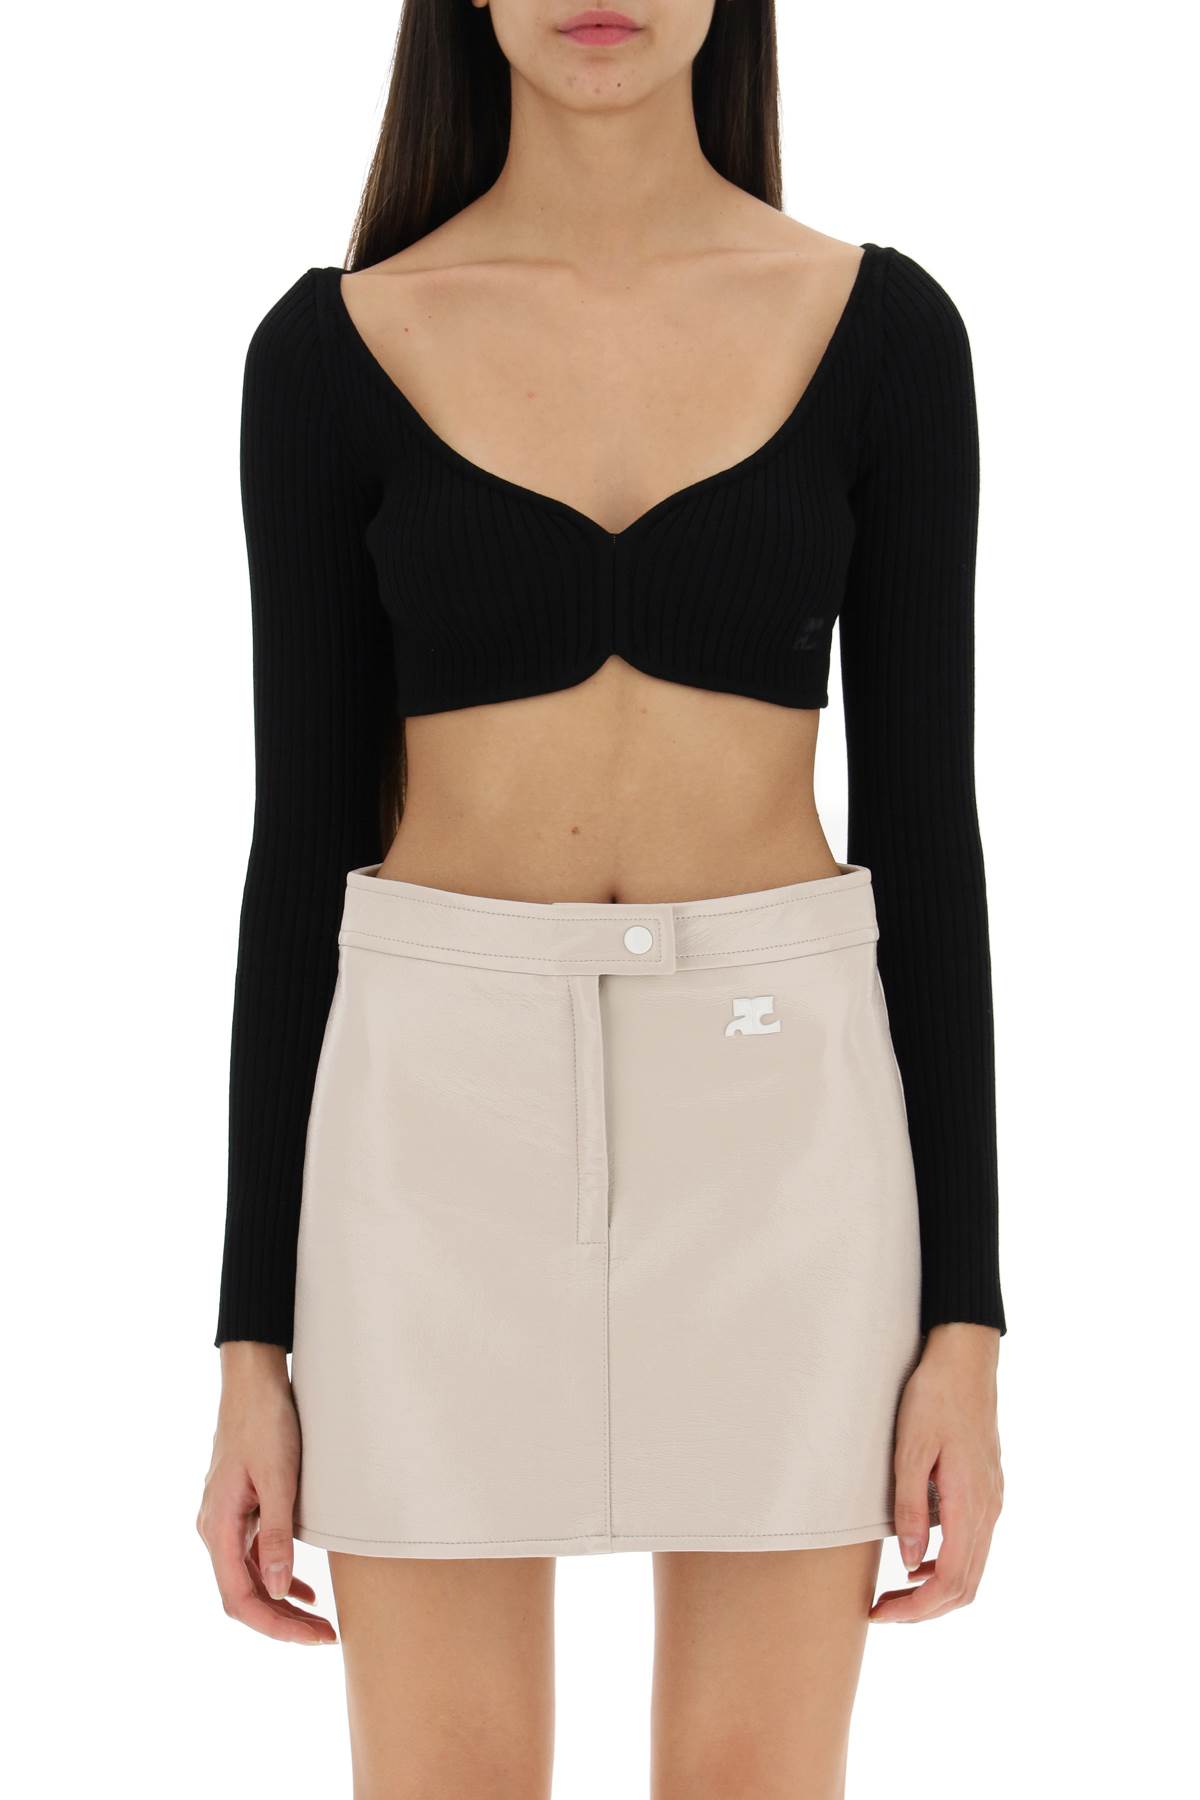 Shop Courrèges Ribbed Cropped Sweater In Black (black)